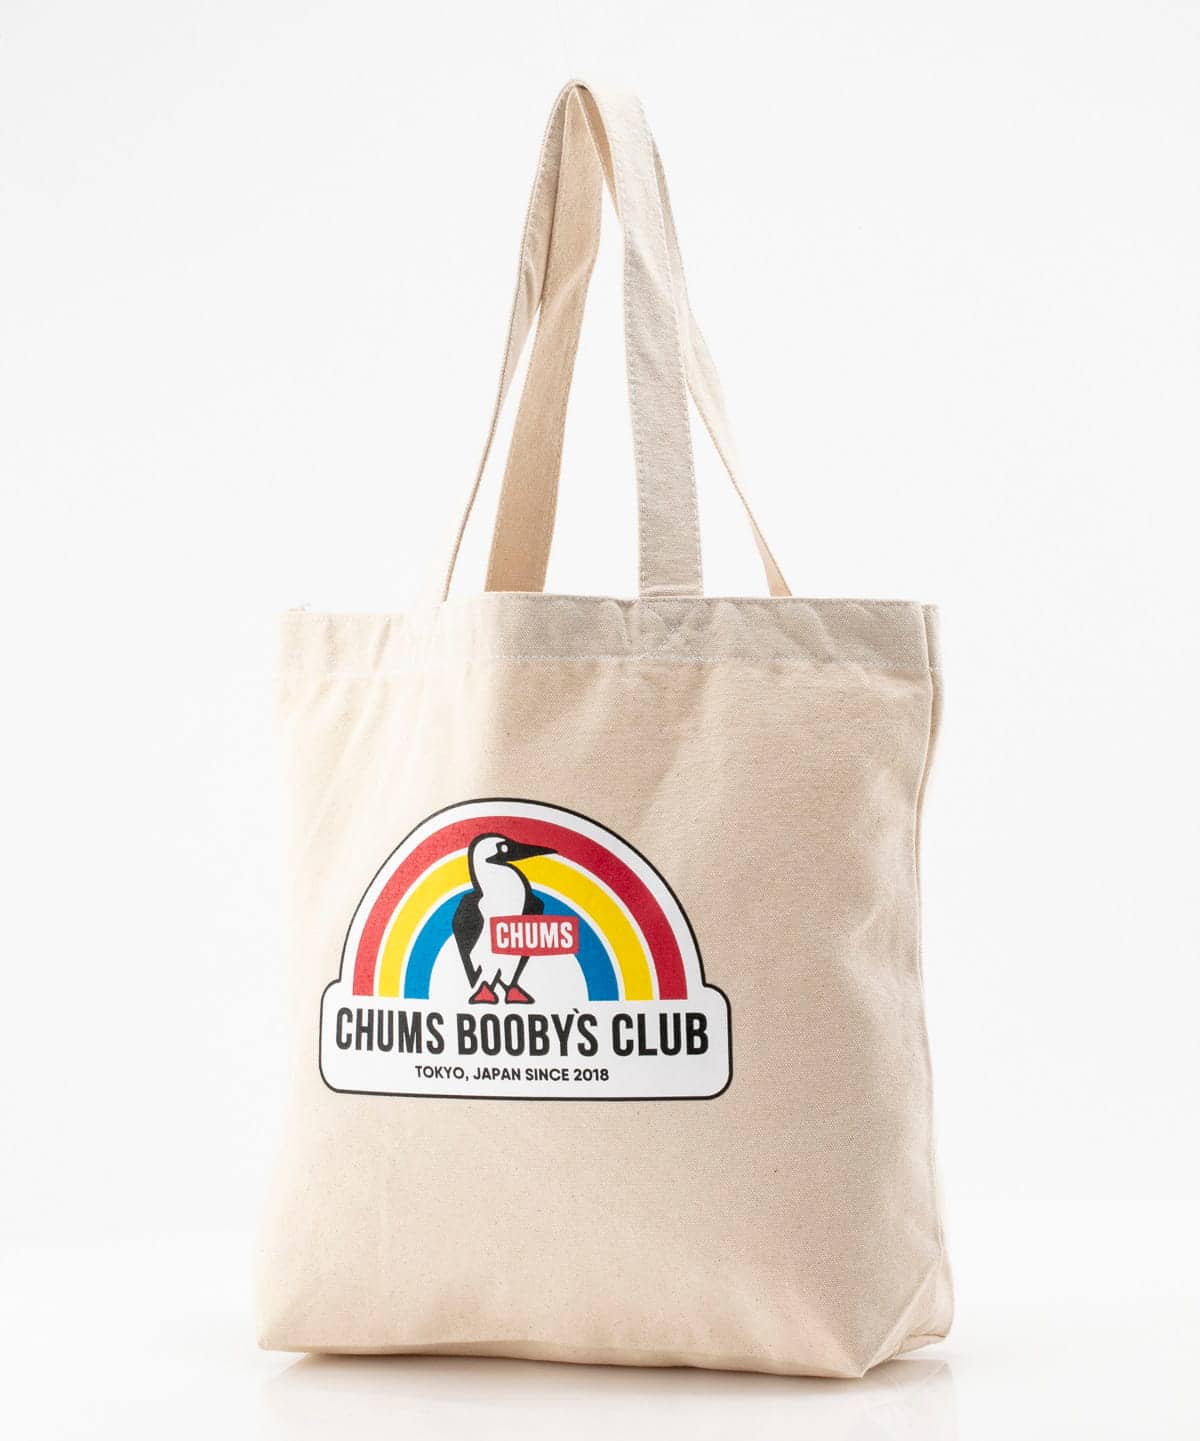 CHUMS Booby's Club Tote Bag(チャムスブービーズクラブトートバッグ)